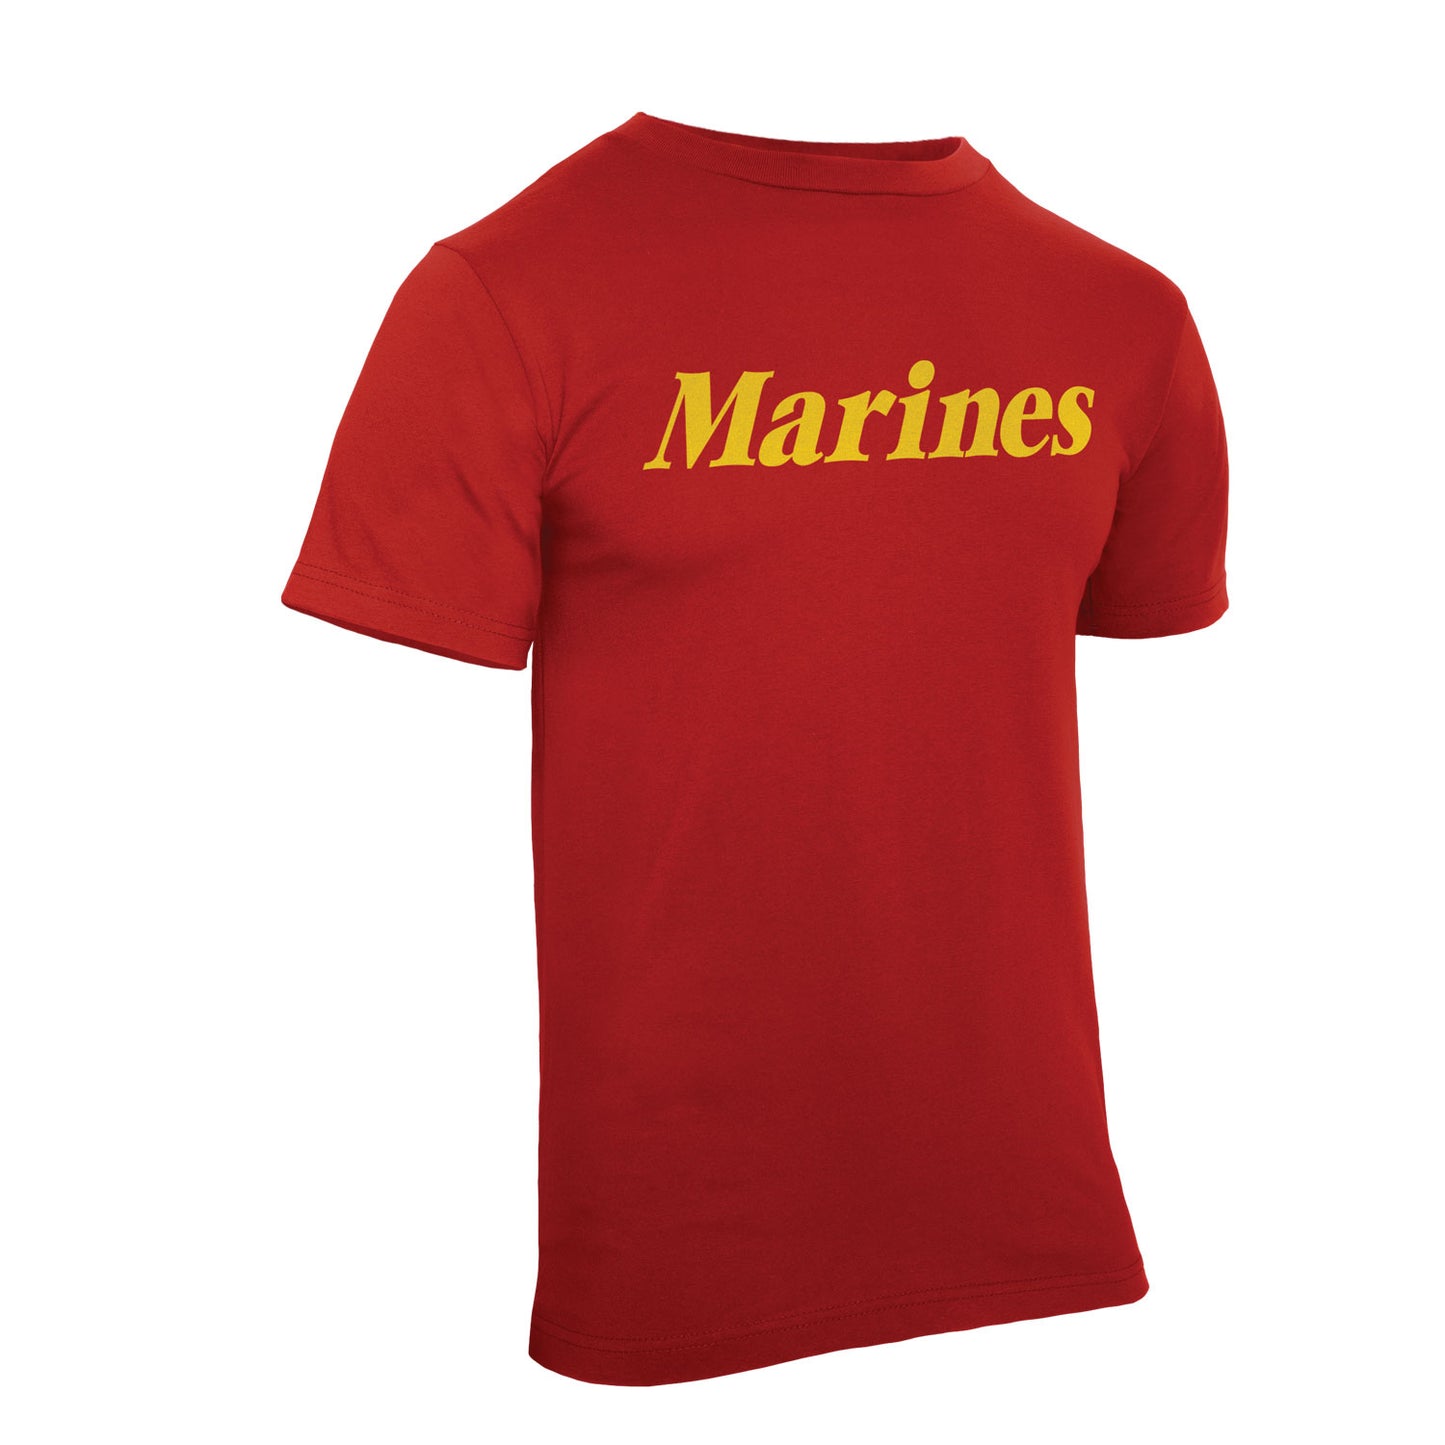 Men's Officially Licensed "Marines" Red T-Shirt